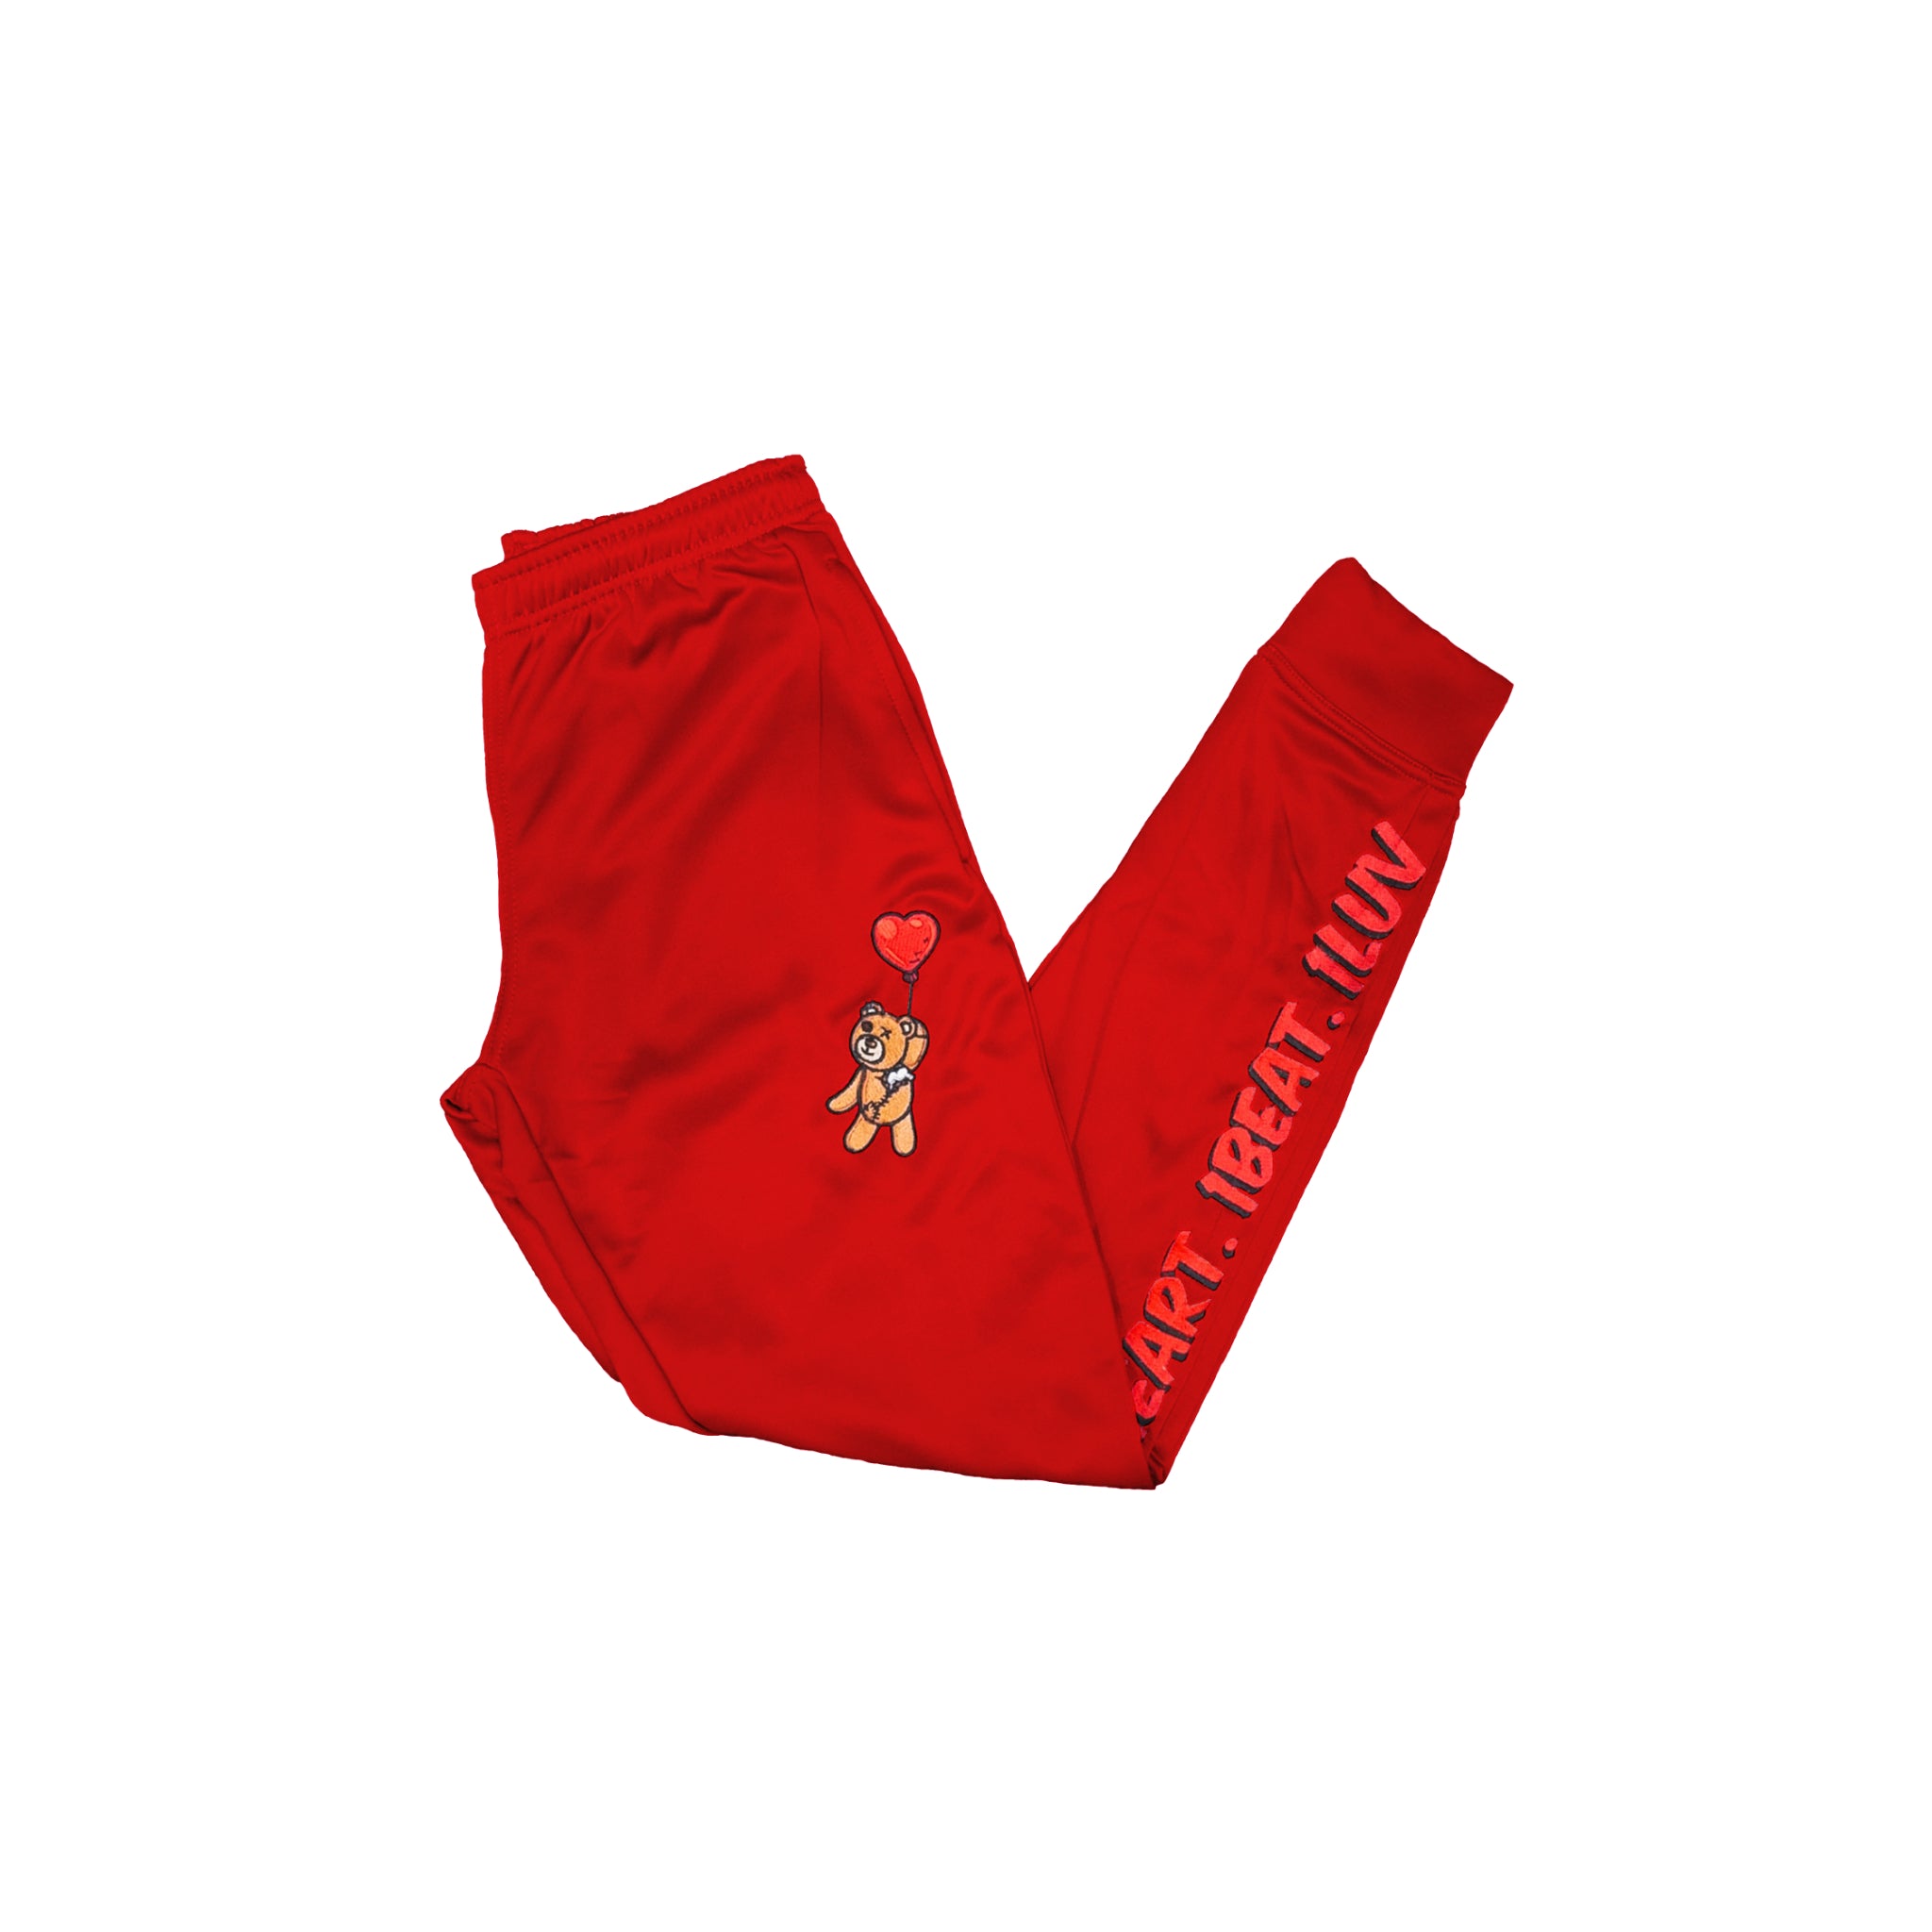 1Luv "Red" Sweat + Track Suit (Bottoms)